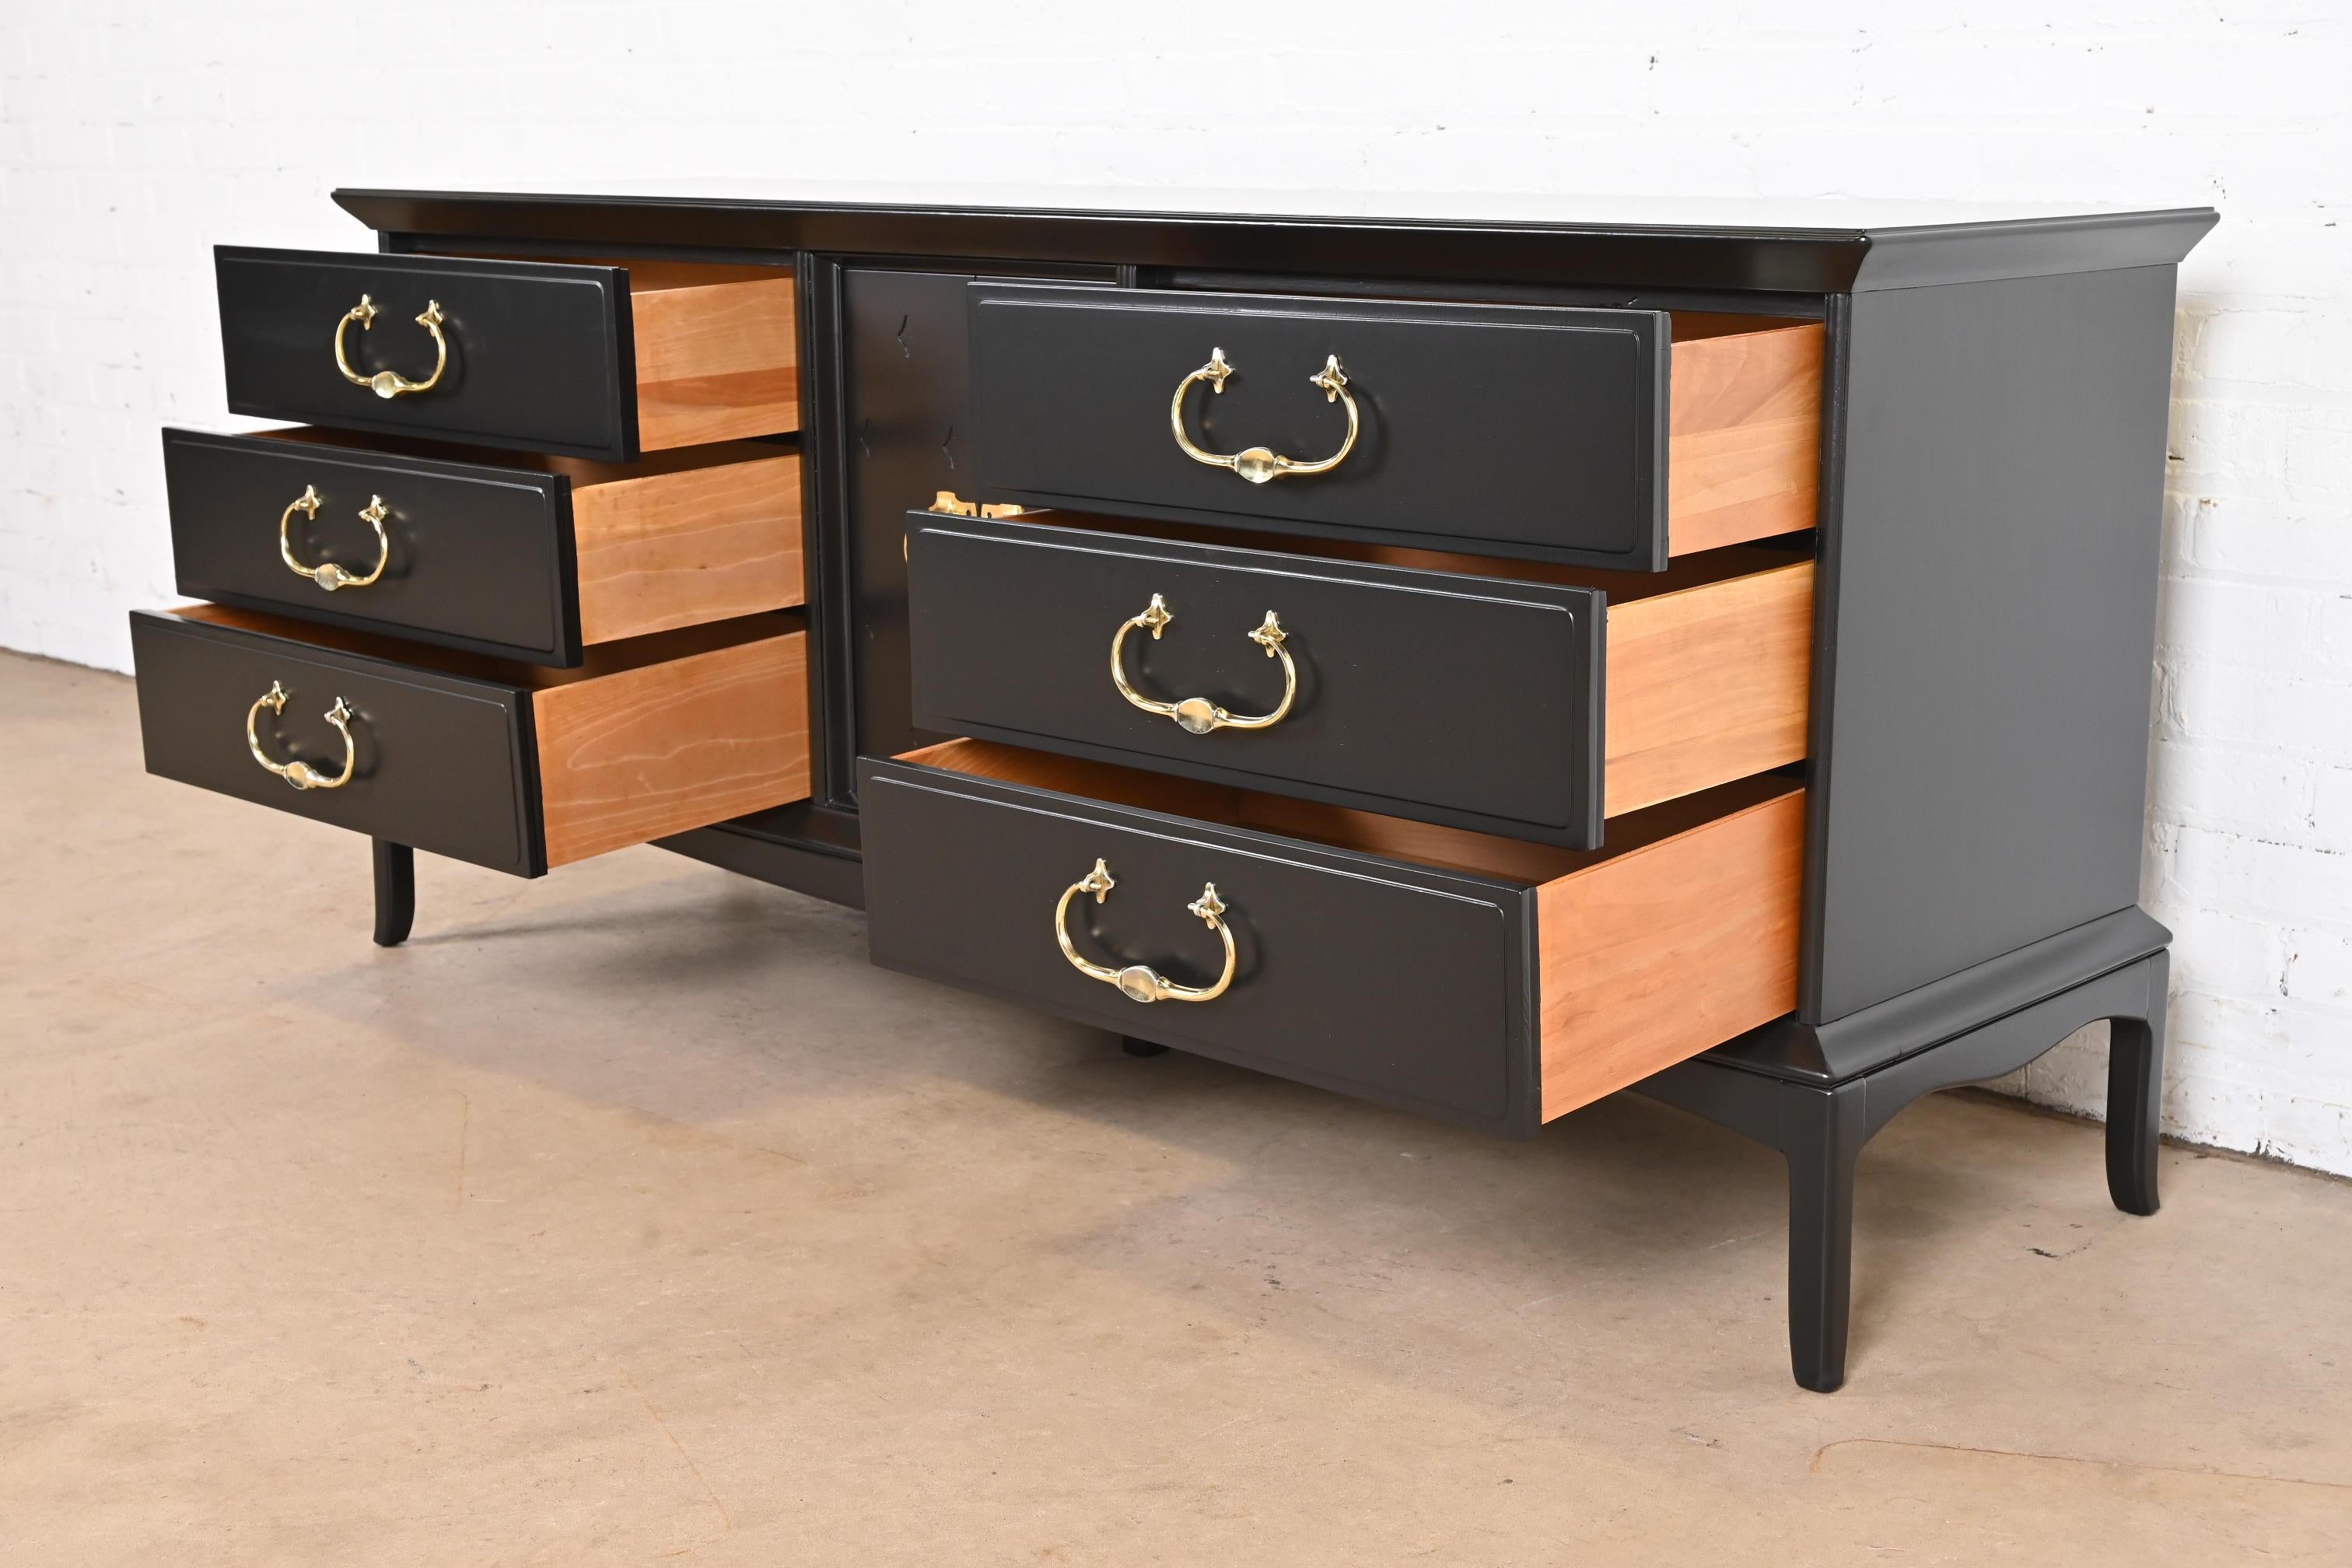 Thomasville Mid-Century Hollywood Regency Black Lacquered Dresser, Refinished 1